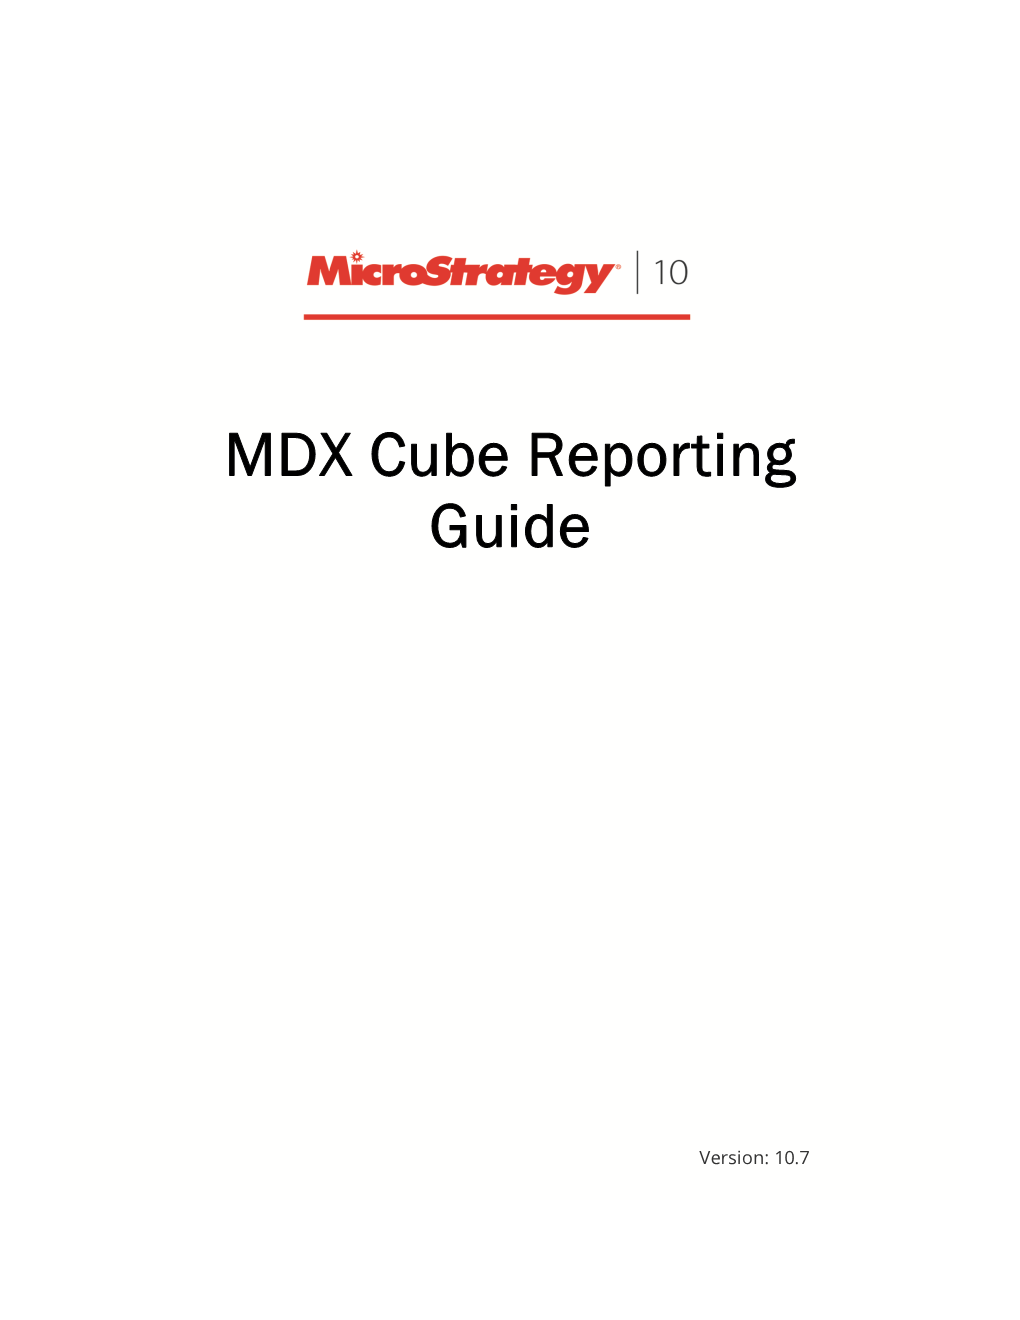 Microstrategy MDX Cube Reporting Guide Provides Comprehensive Information on Integrating Microstrategy with Multidimensional Expression (MDX) Cube Sources